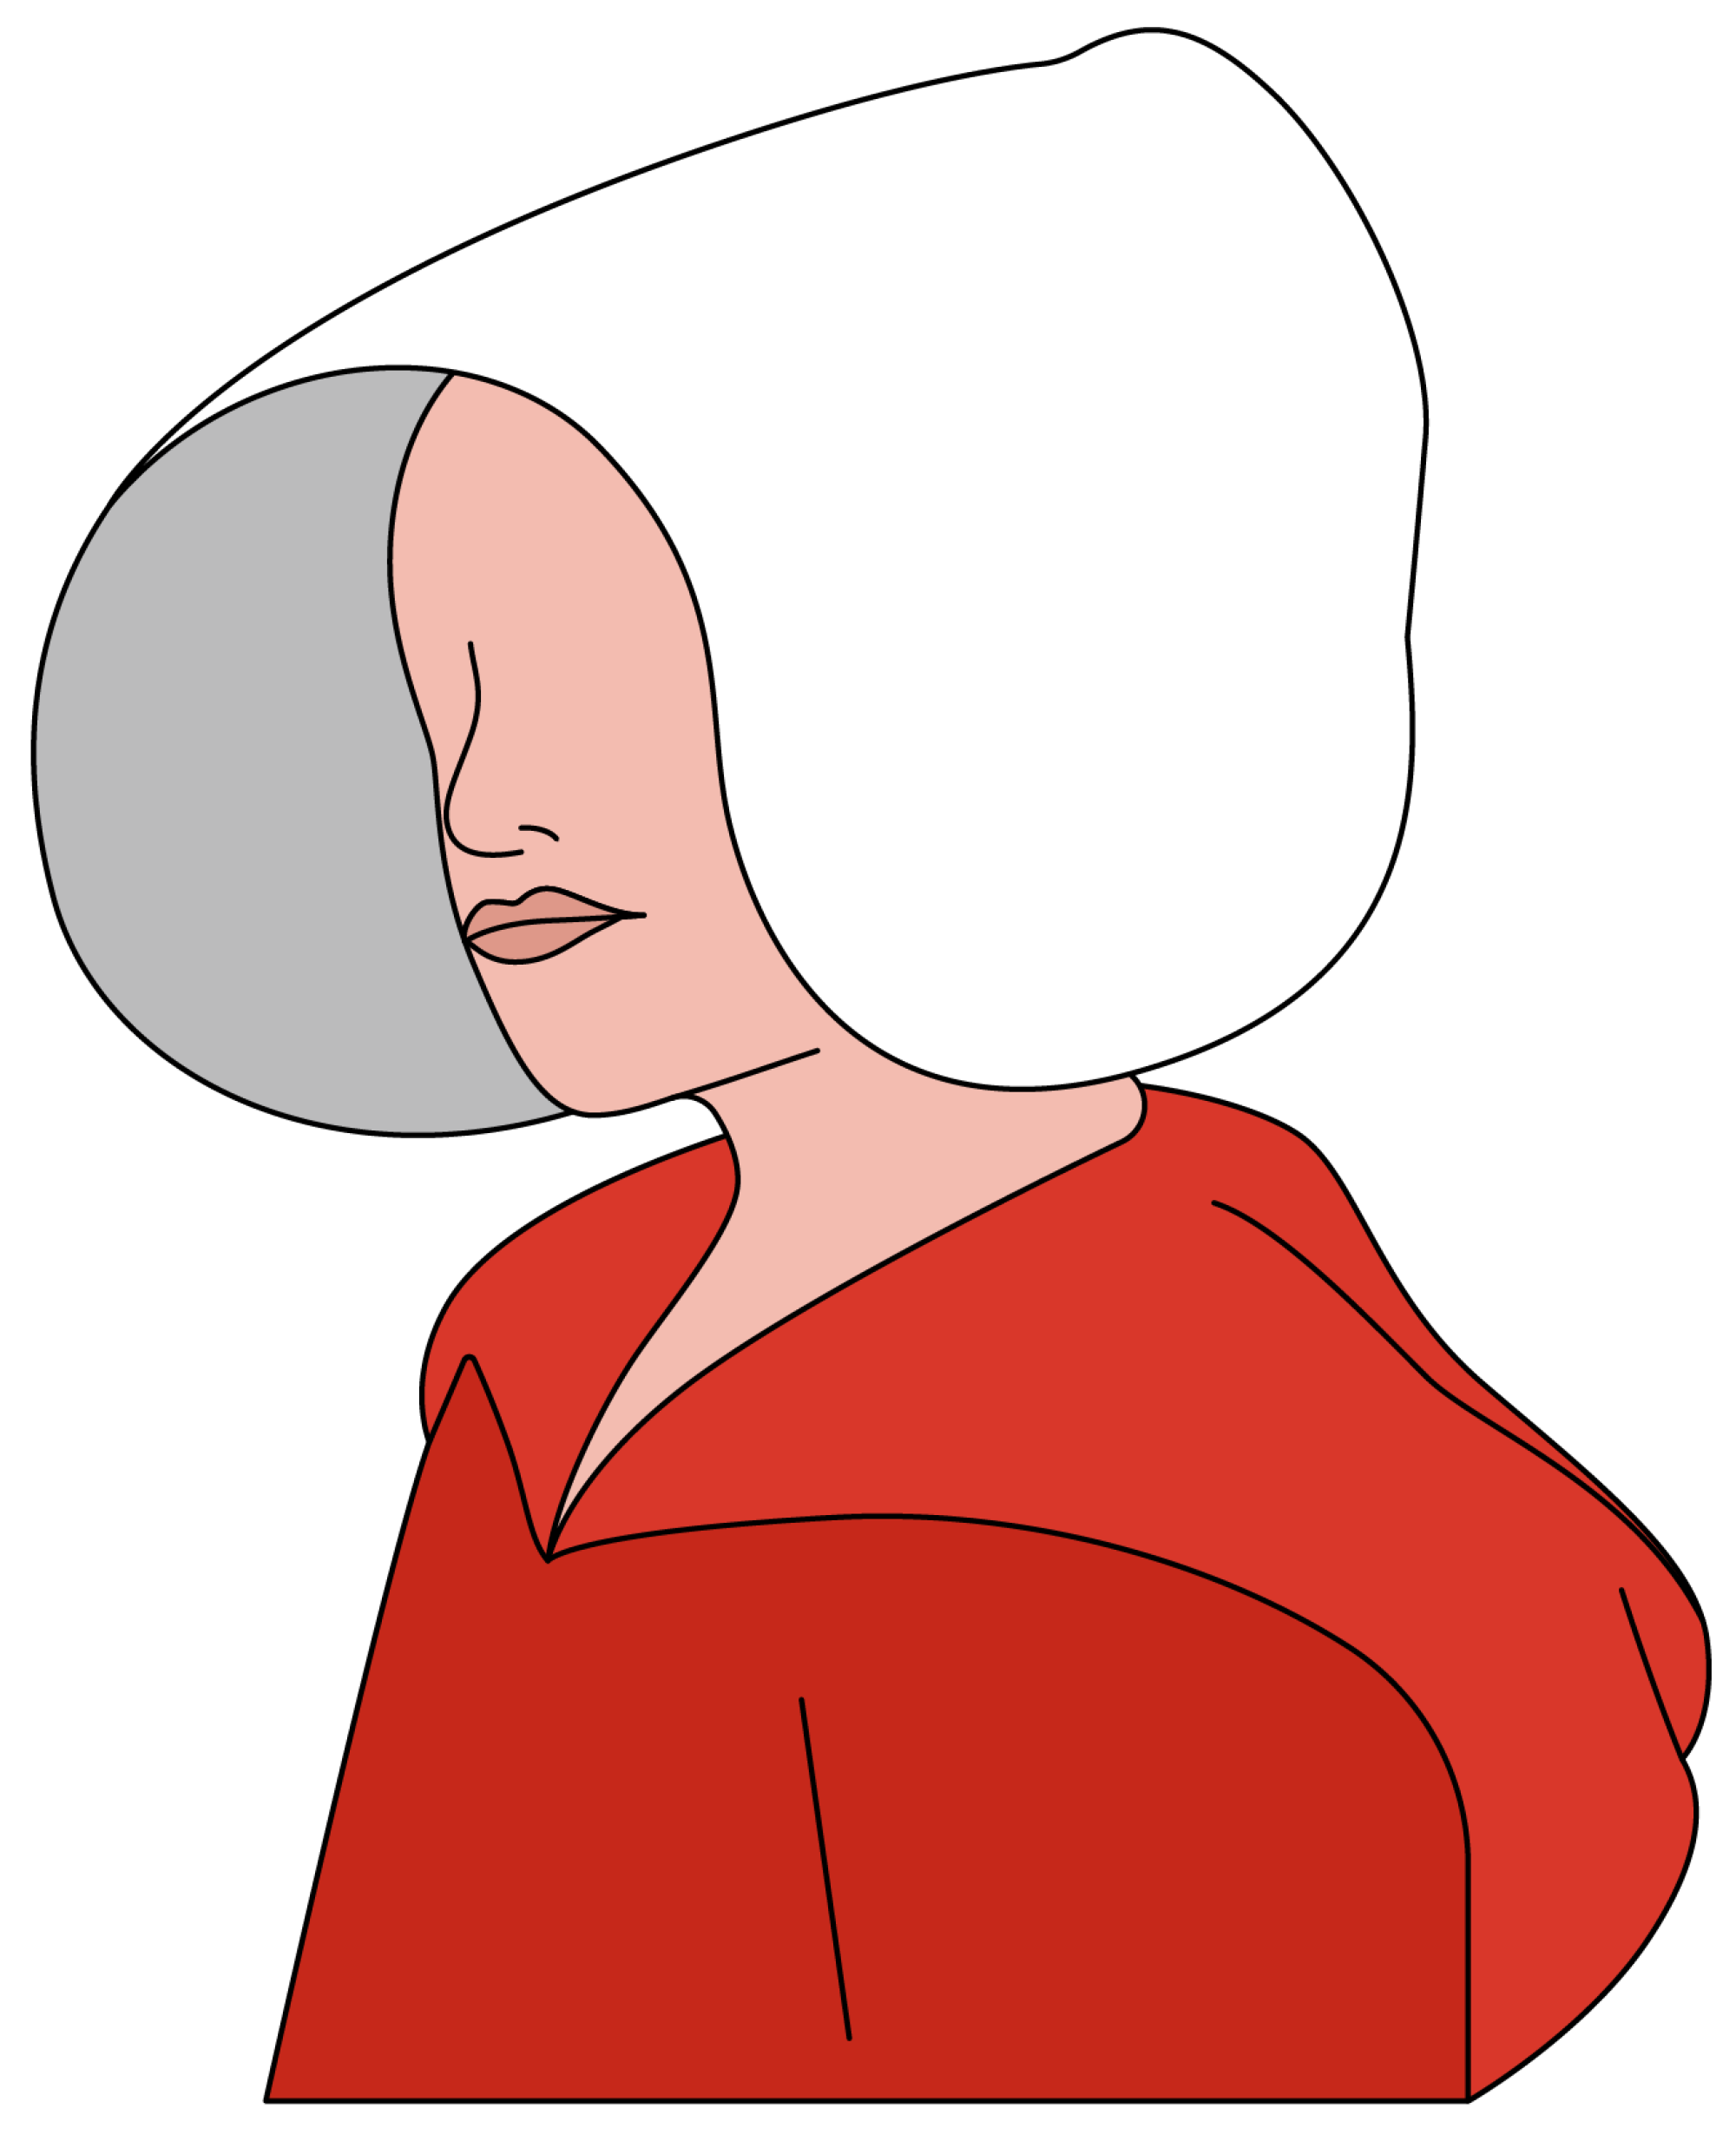 Illustration of a handmaid from "The Handmaids Tale"